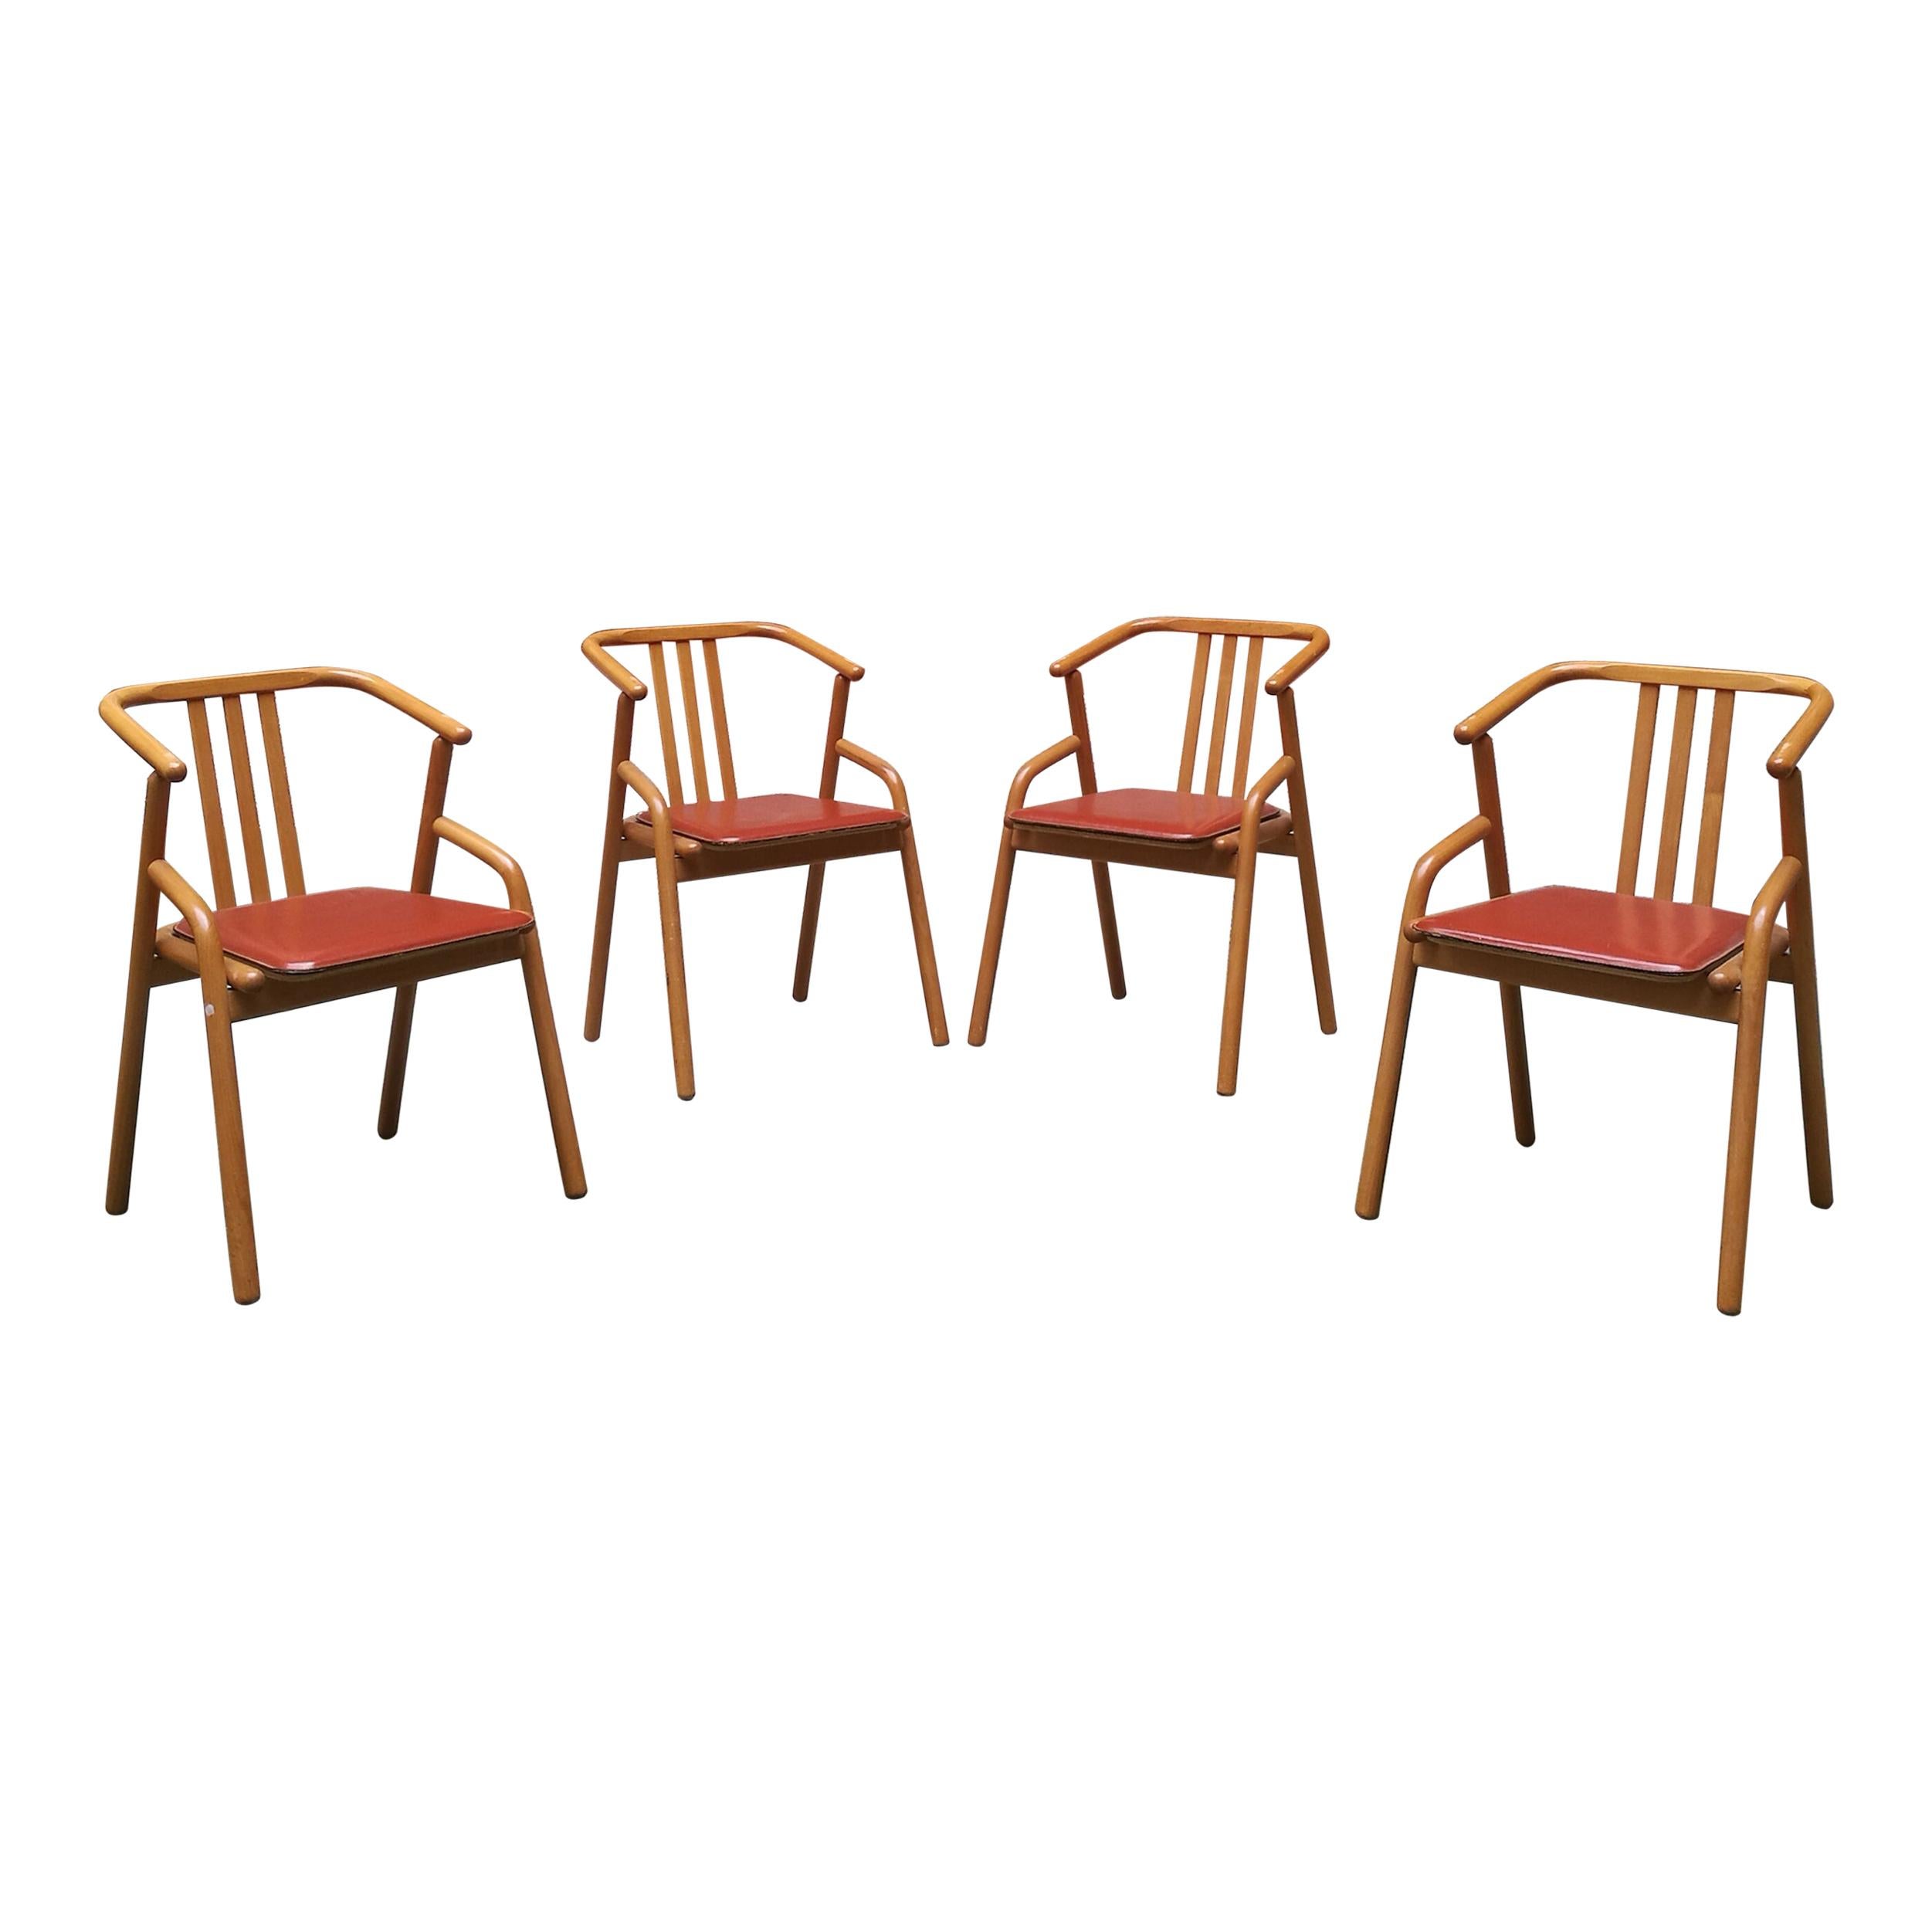 Italian Midcentury Solid Beech Wood and Red Leather Dining Chairs, 1980s